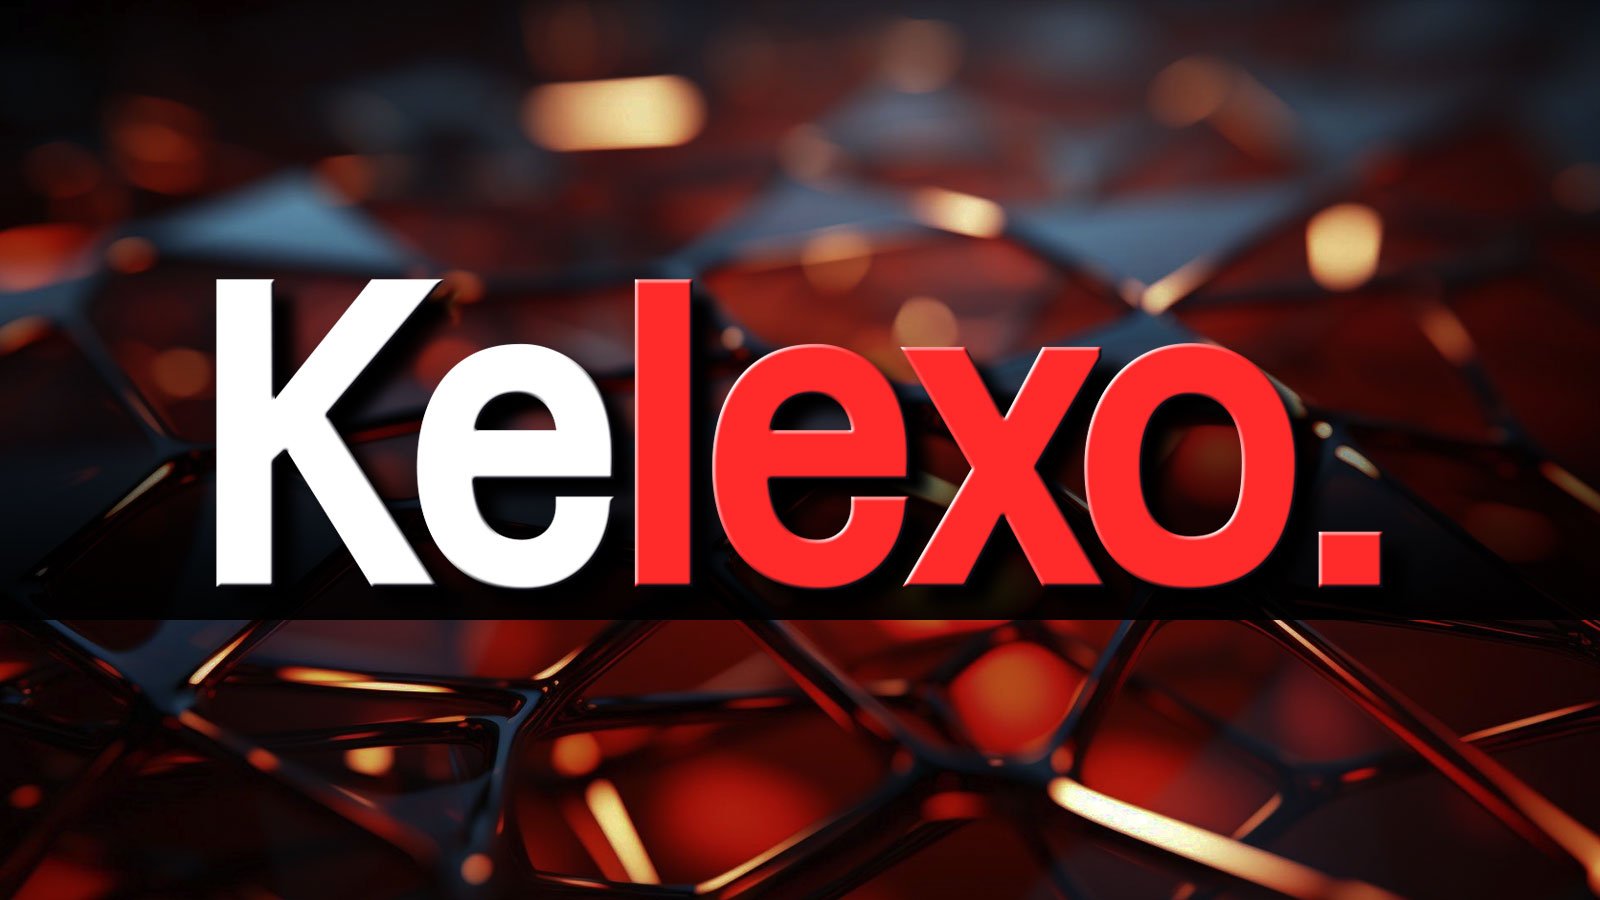 Kelexo (KLXO) Pre-Sale Welcomes New Generation of Investors in Late April as XRP, Ethereum (ETH) Top Altcoins Back to Surging